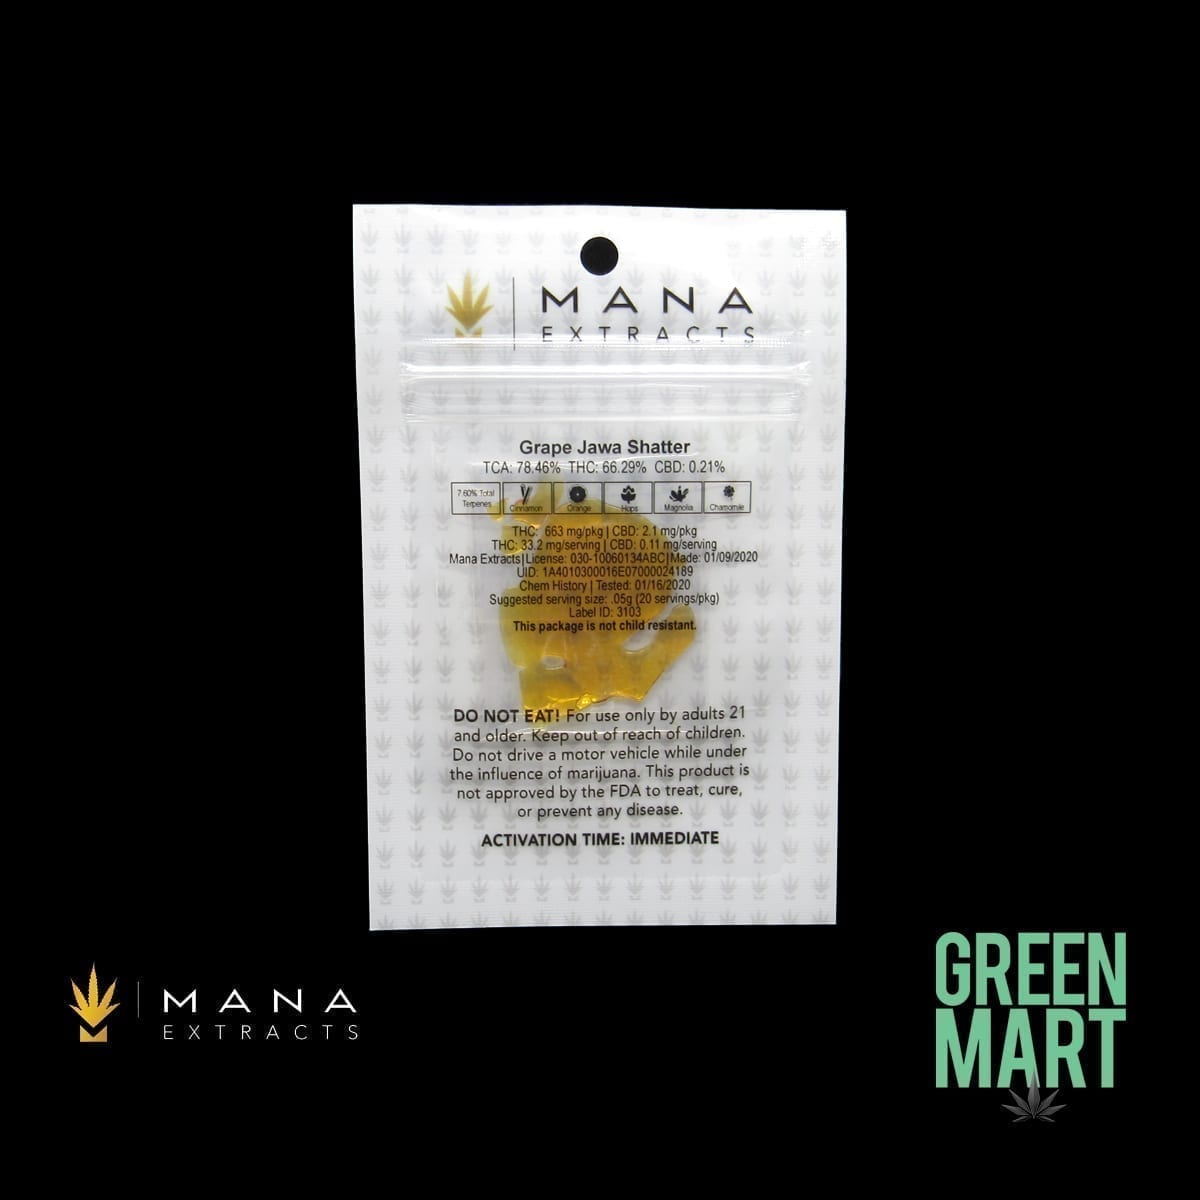 Grape Jawa Shatter by Mana Extracts